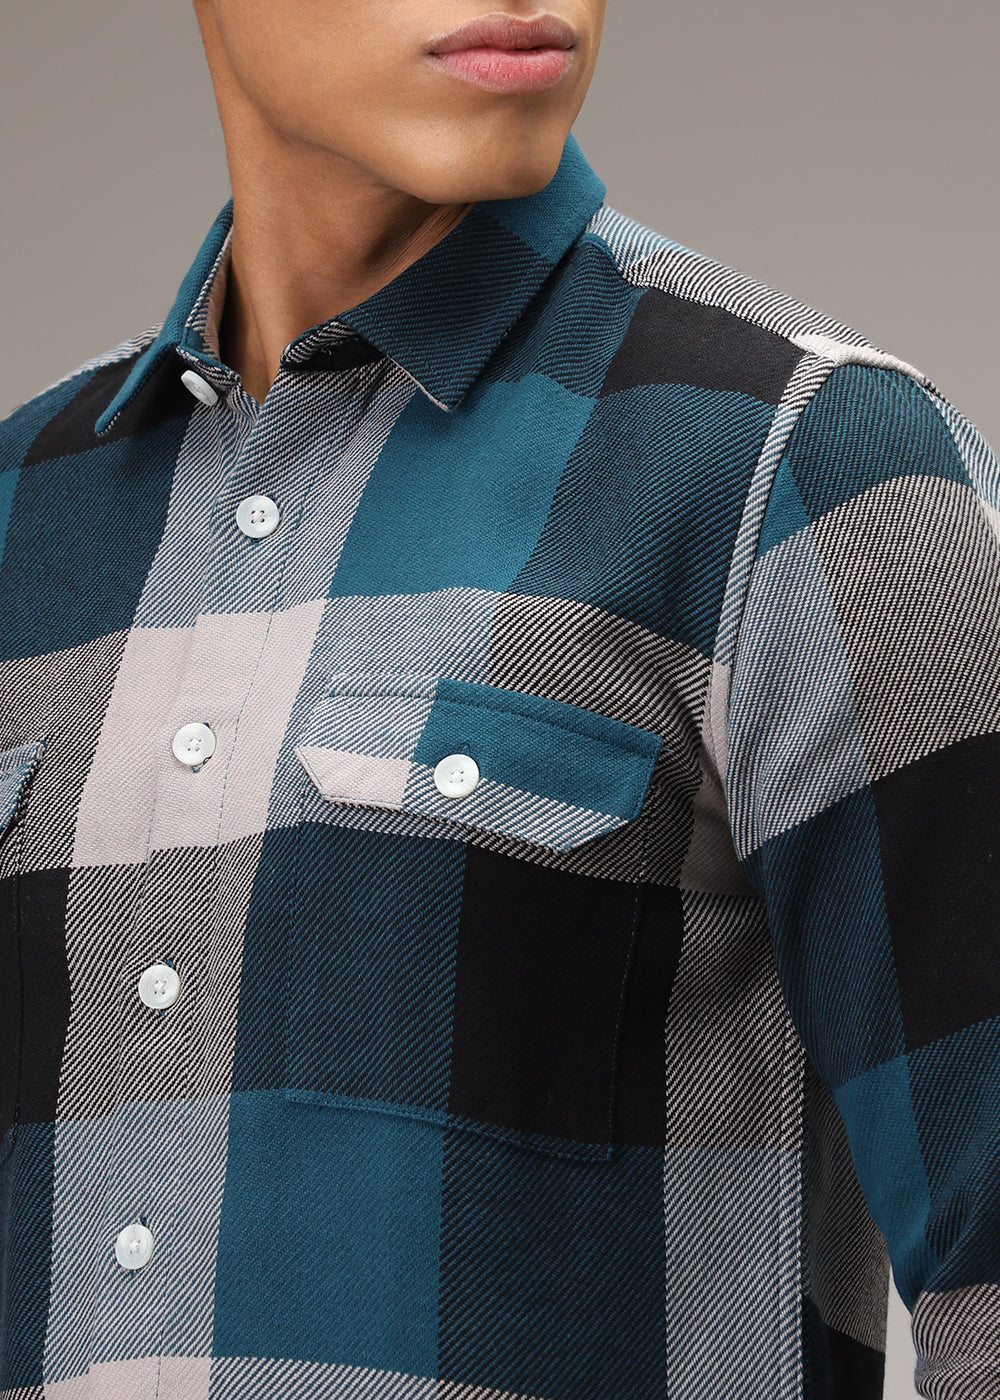 Teal Blue Brushed Cotton Check Shirt